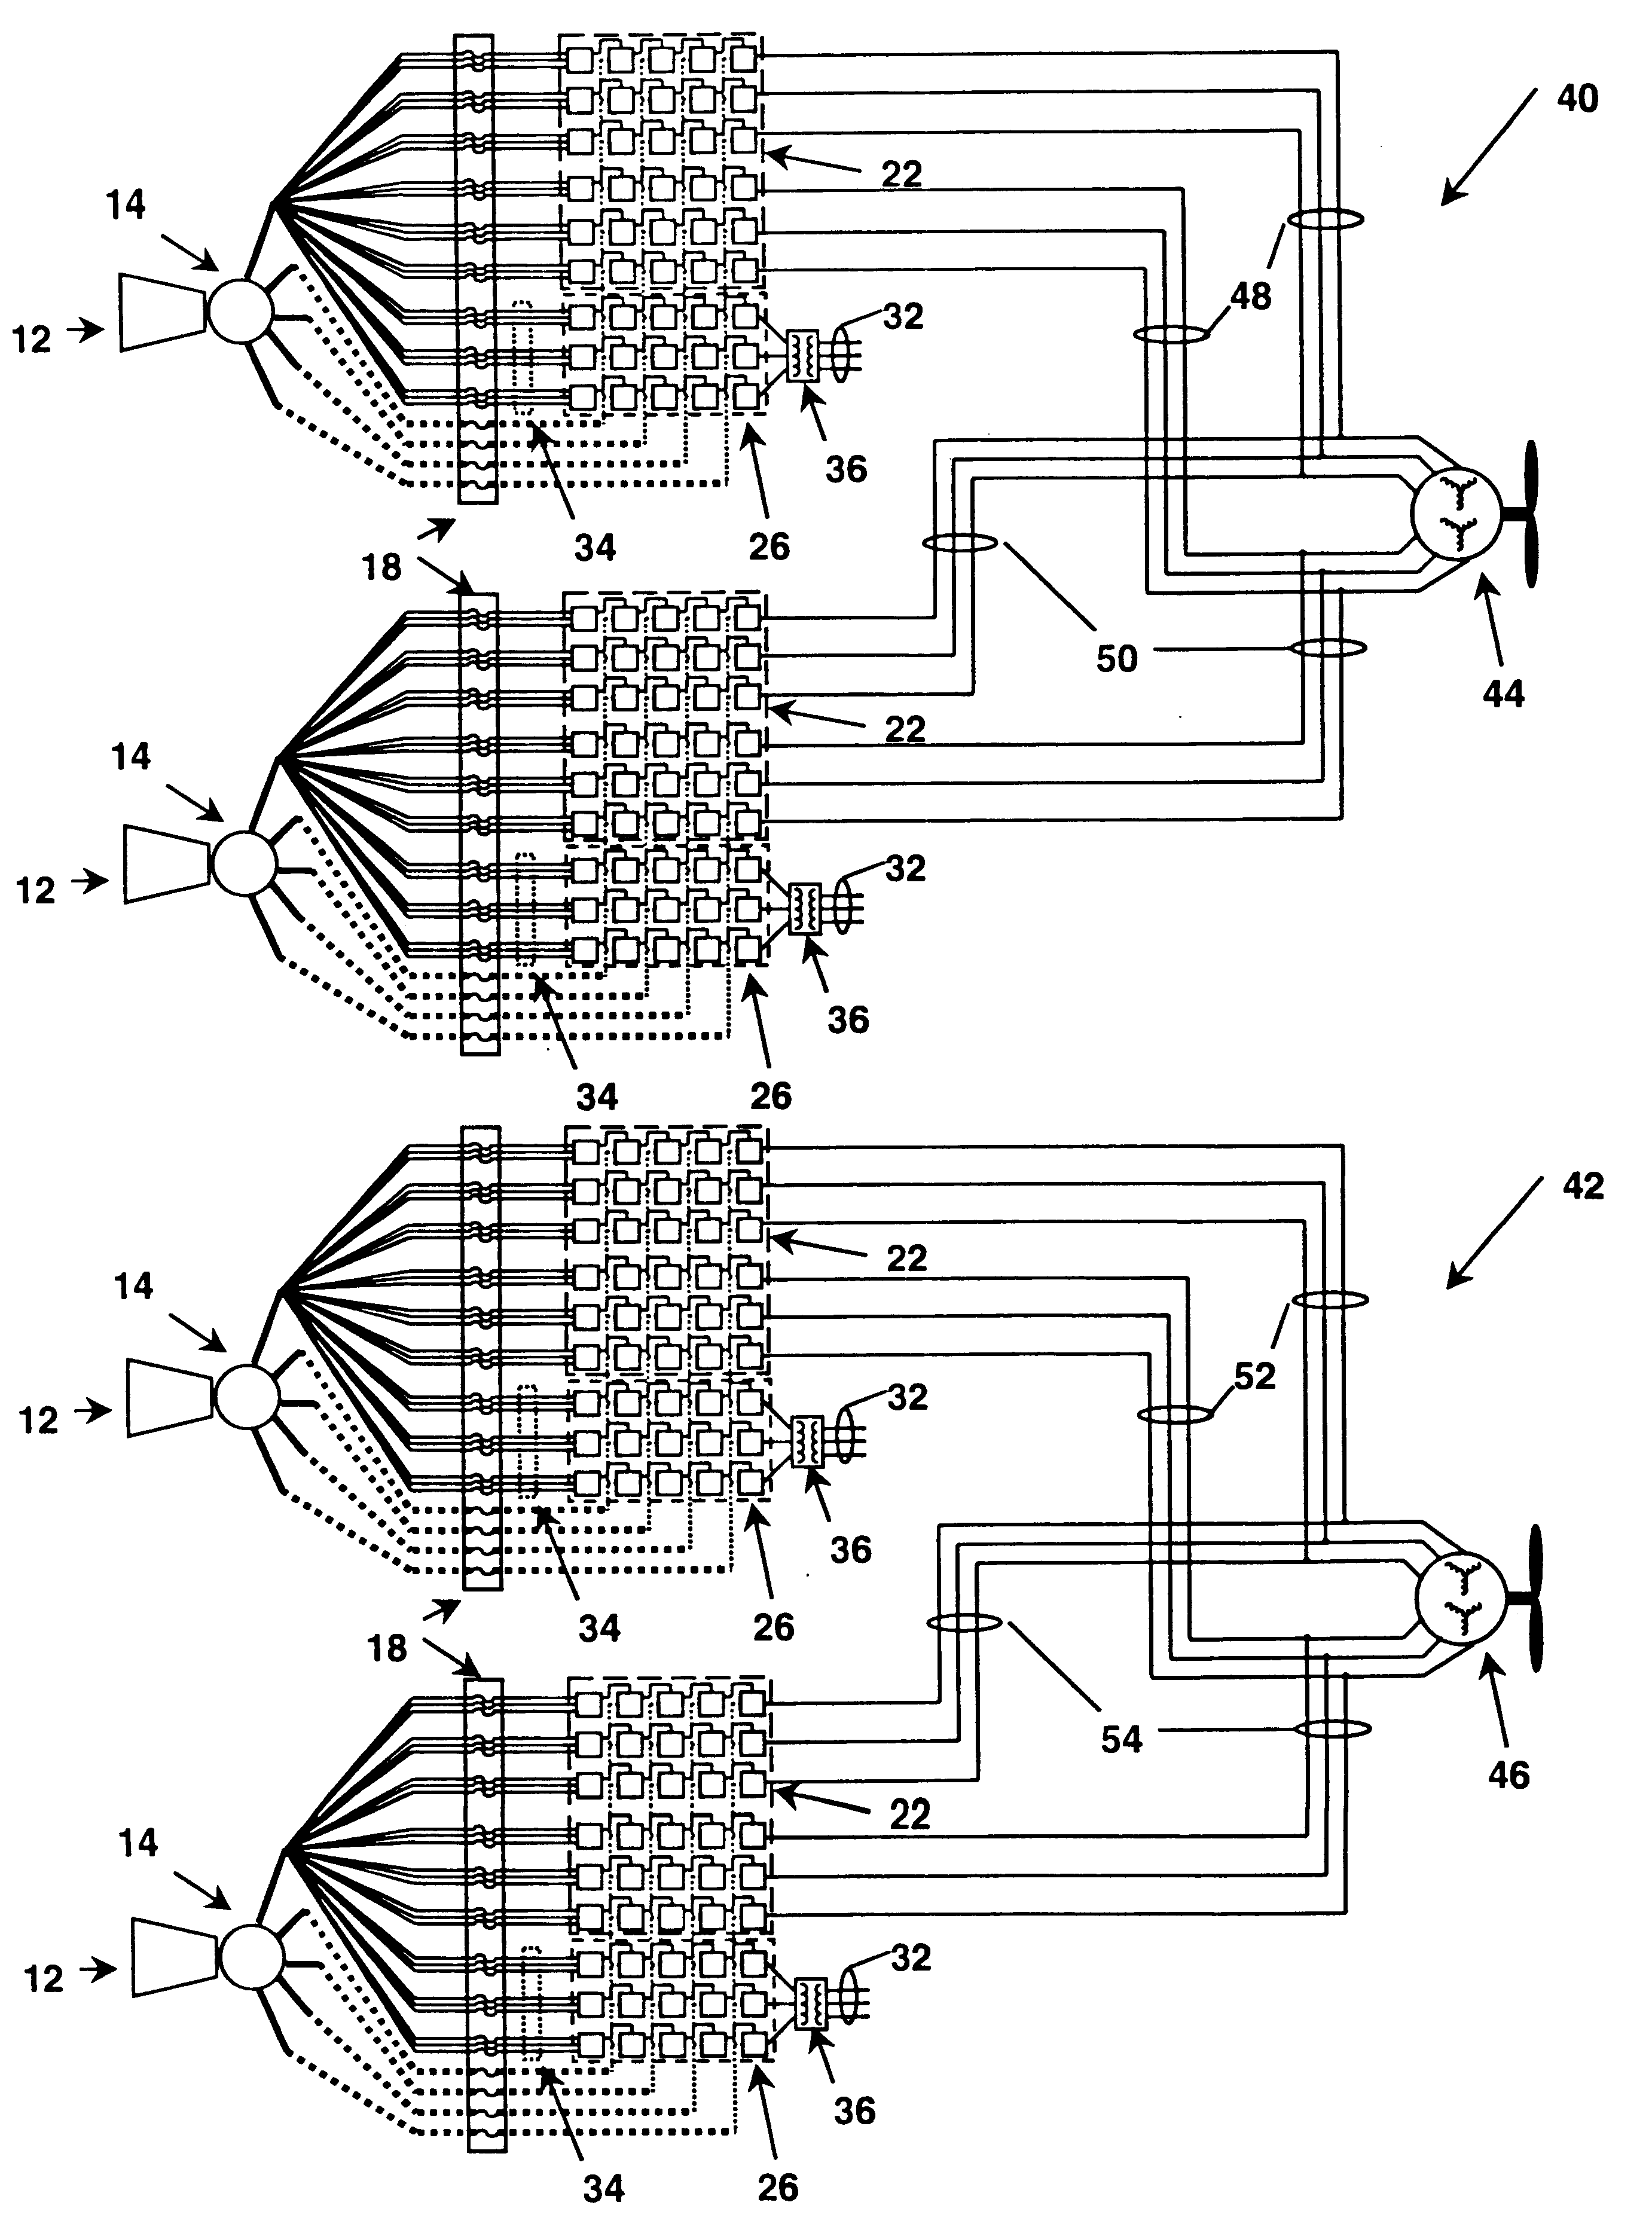 Integrated high frequency marine power distribution arrangement with transformerless high voltage variable speed drive